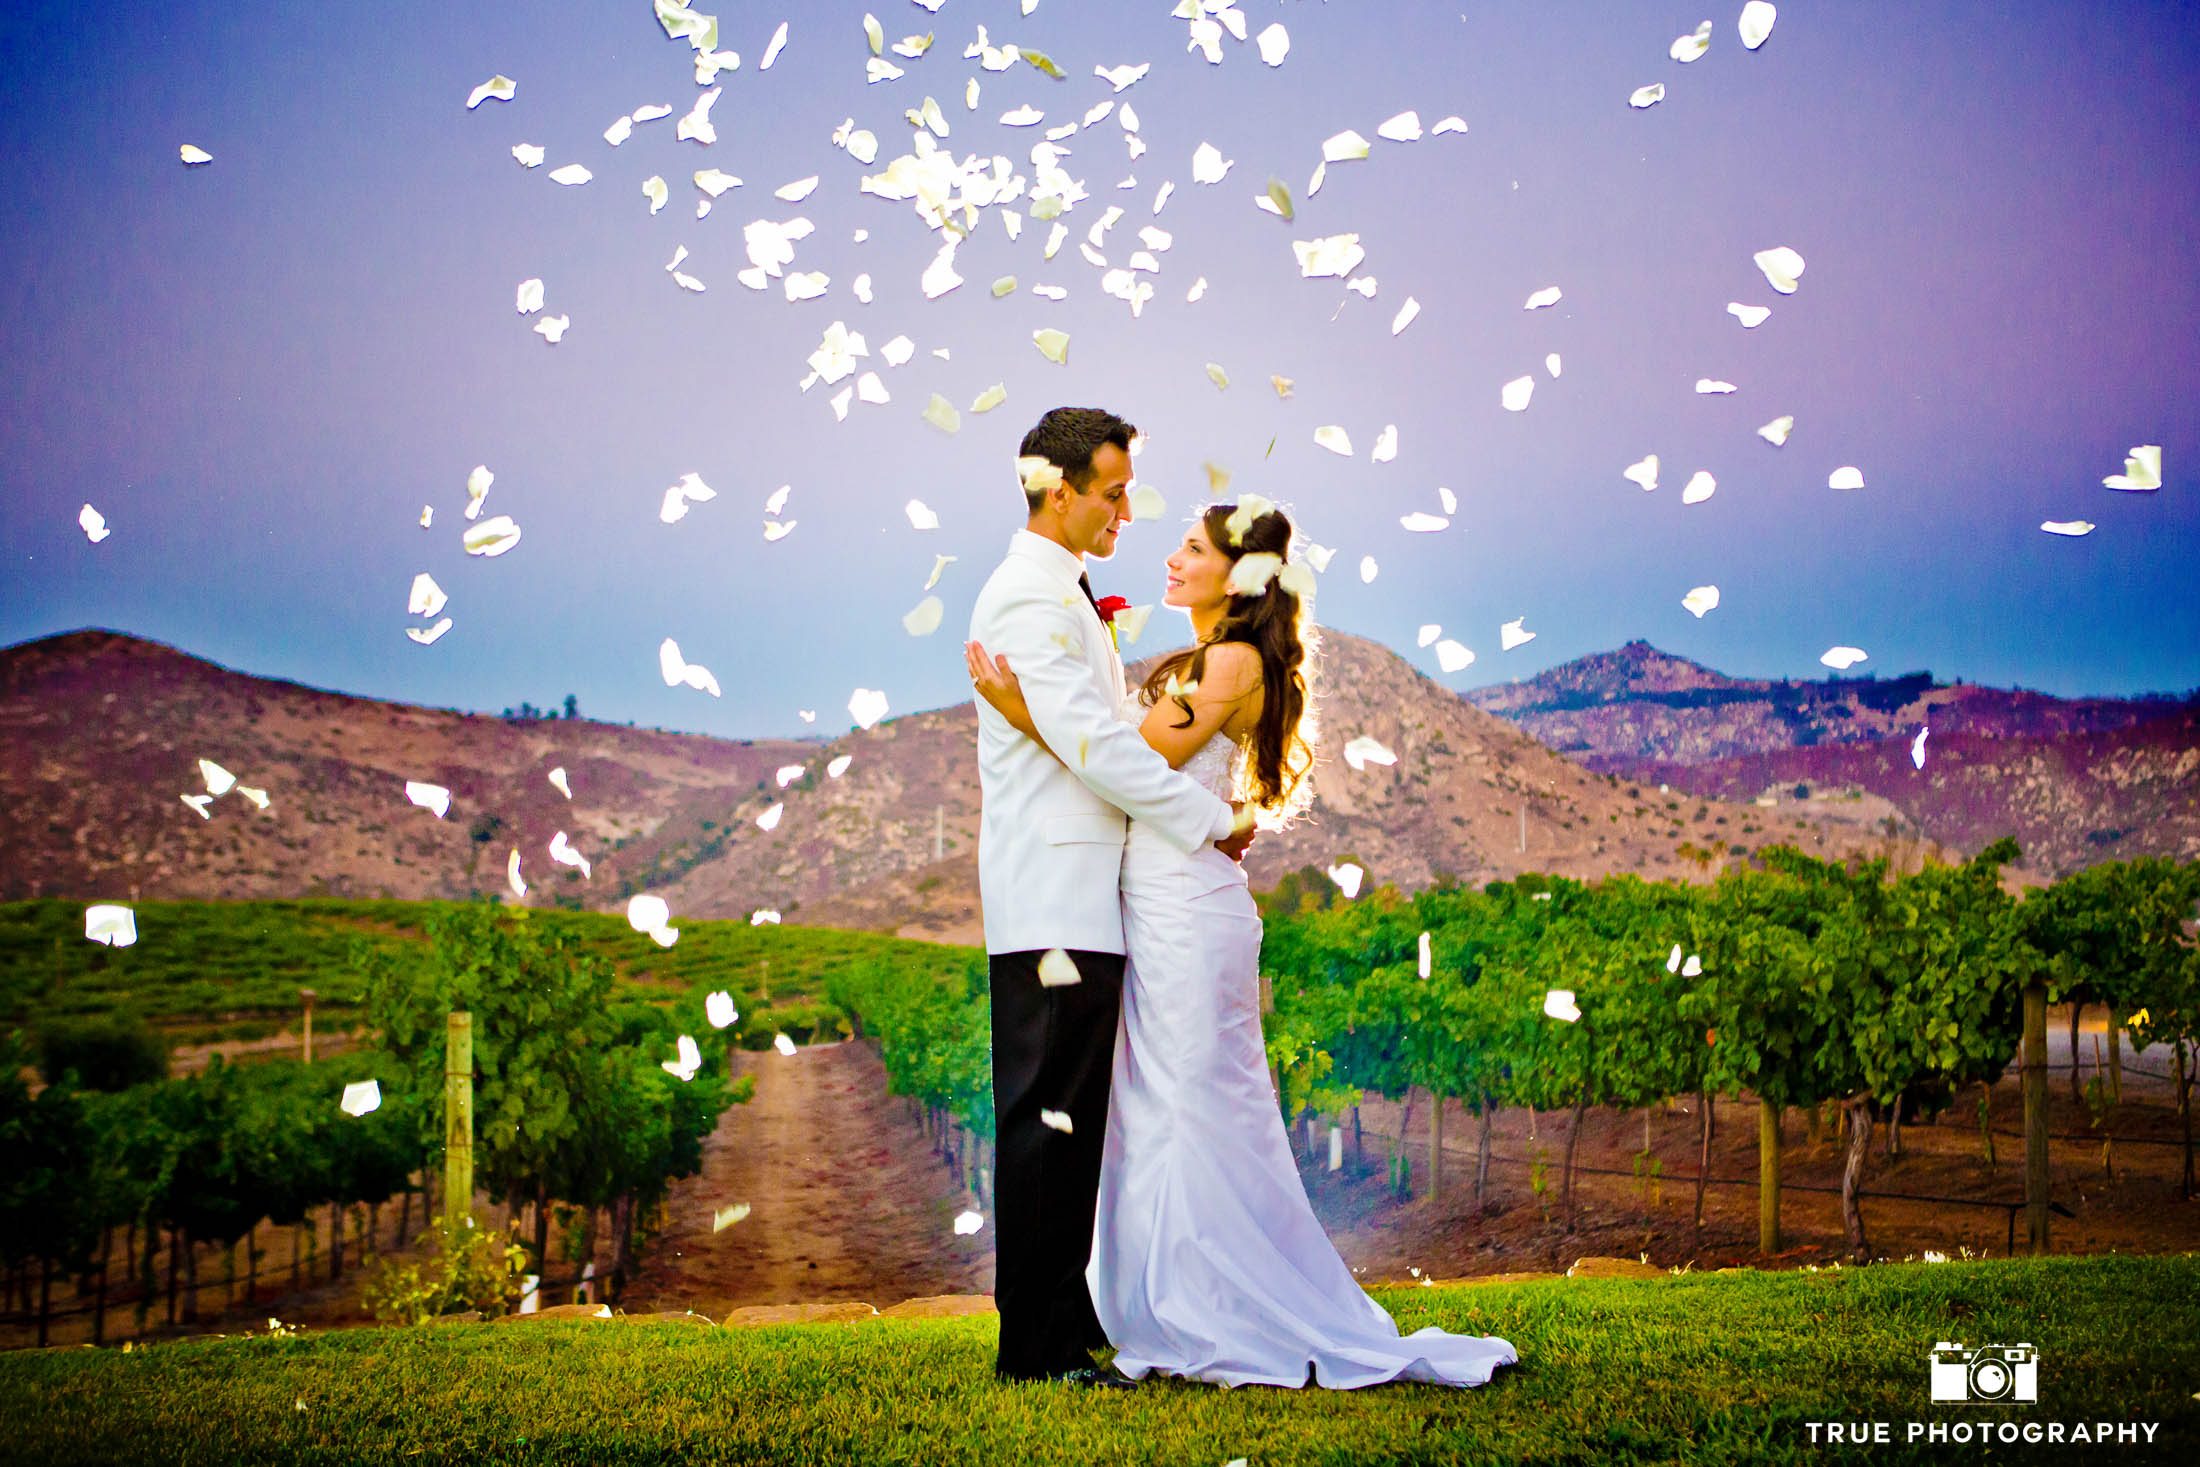 Couple pose with flowers in air around them